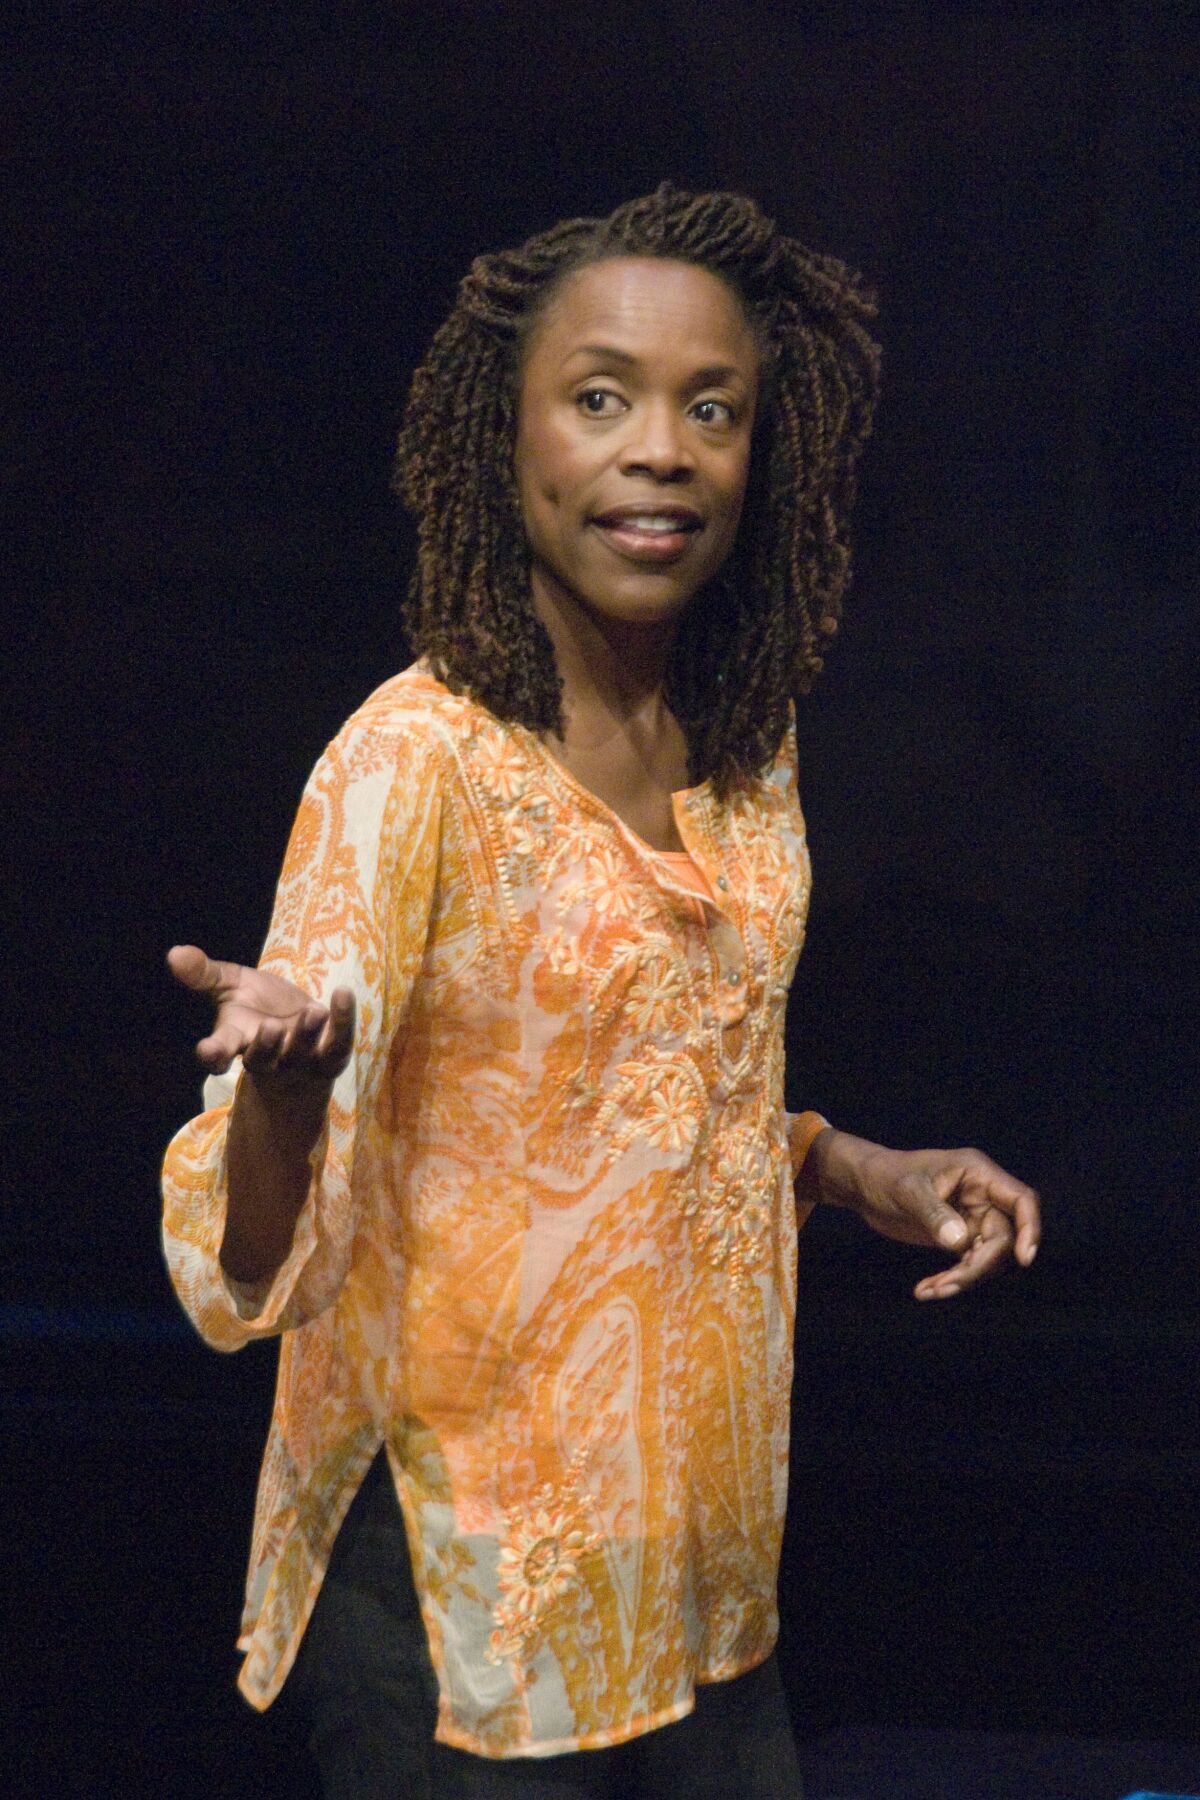 Charlayne Woodard acts in her solo play "The Night Watcher" at La Jolla Playhouse in 2008.